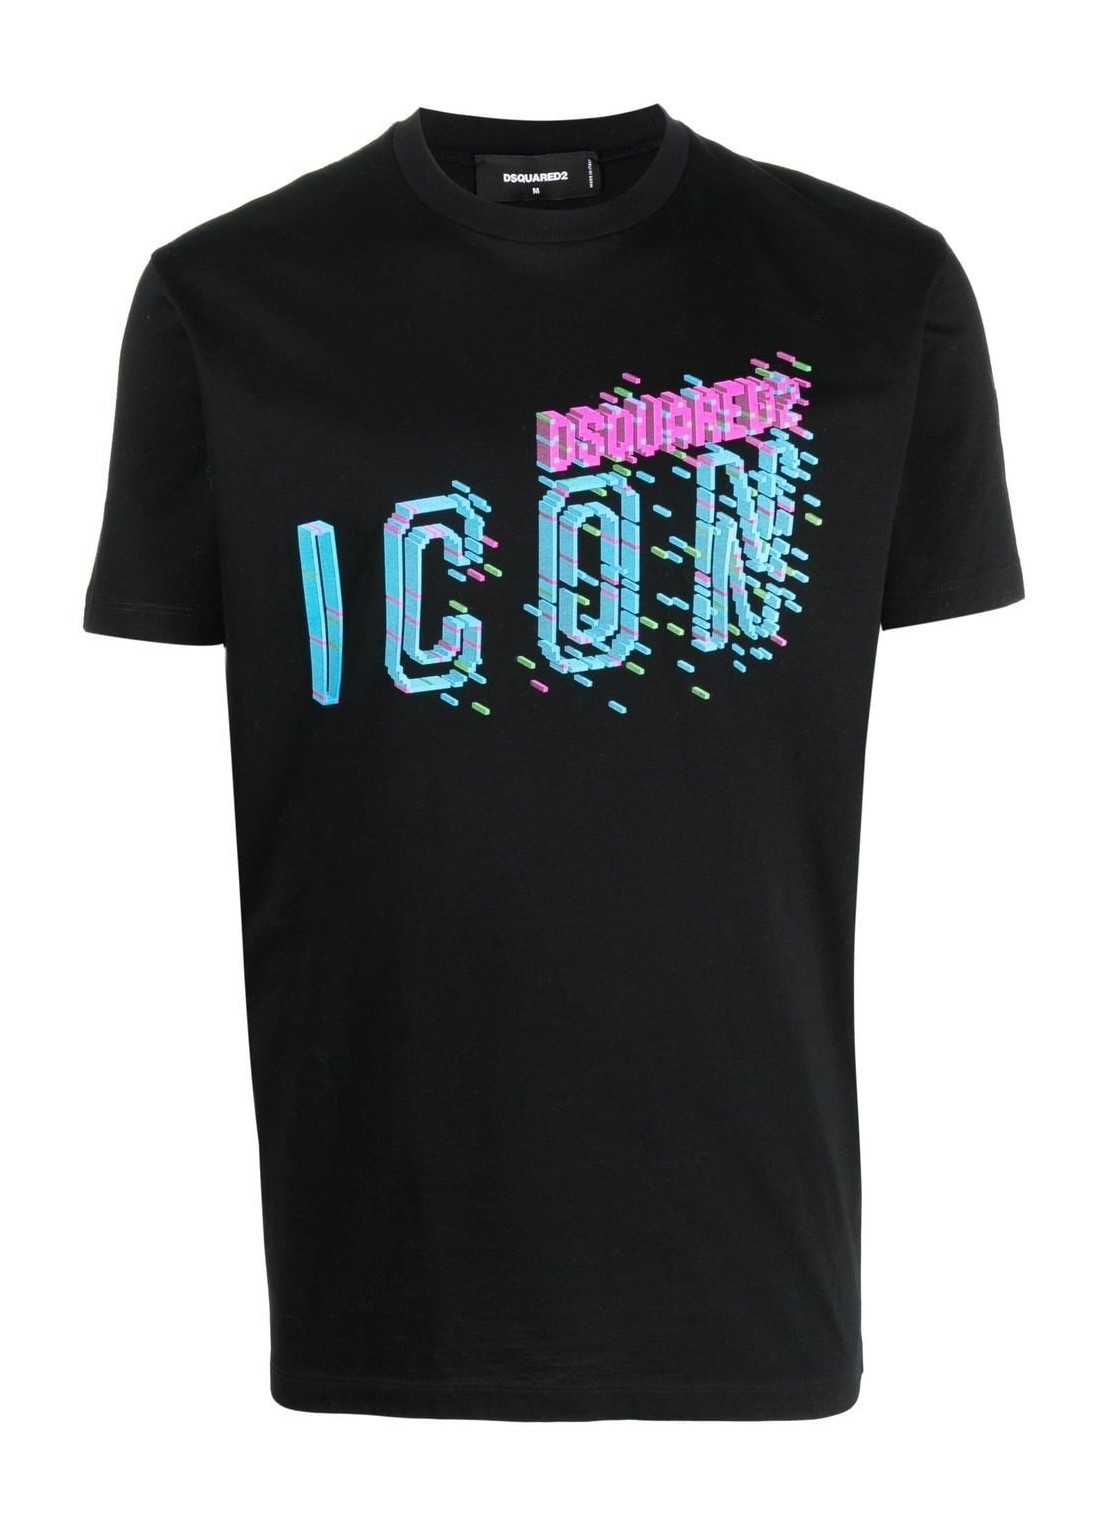 Camiseta dsquared t-shirt man pixeled icon cool fit tee s79gc0078s23009 900 talla negro
 